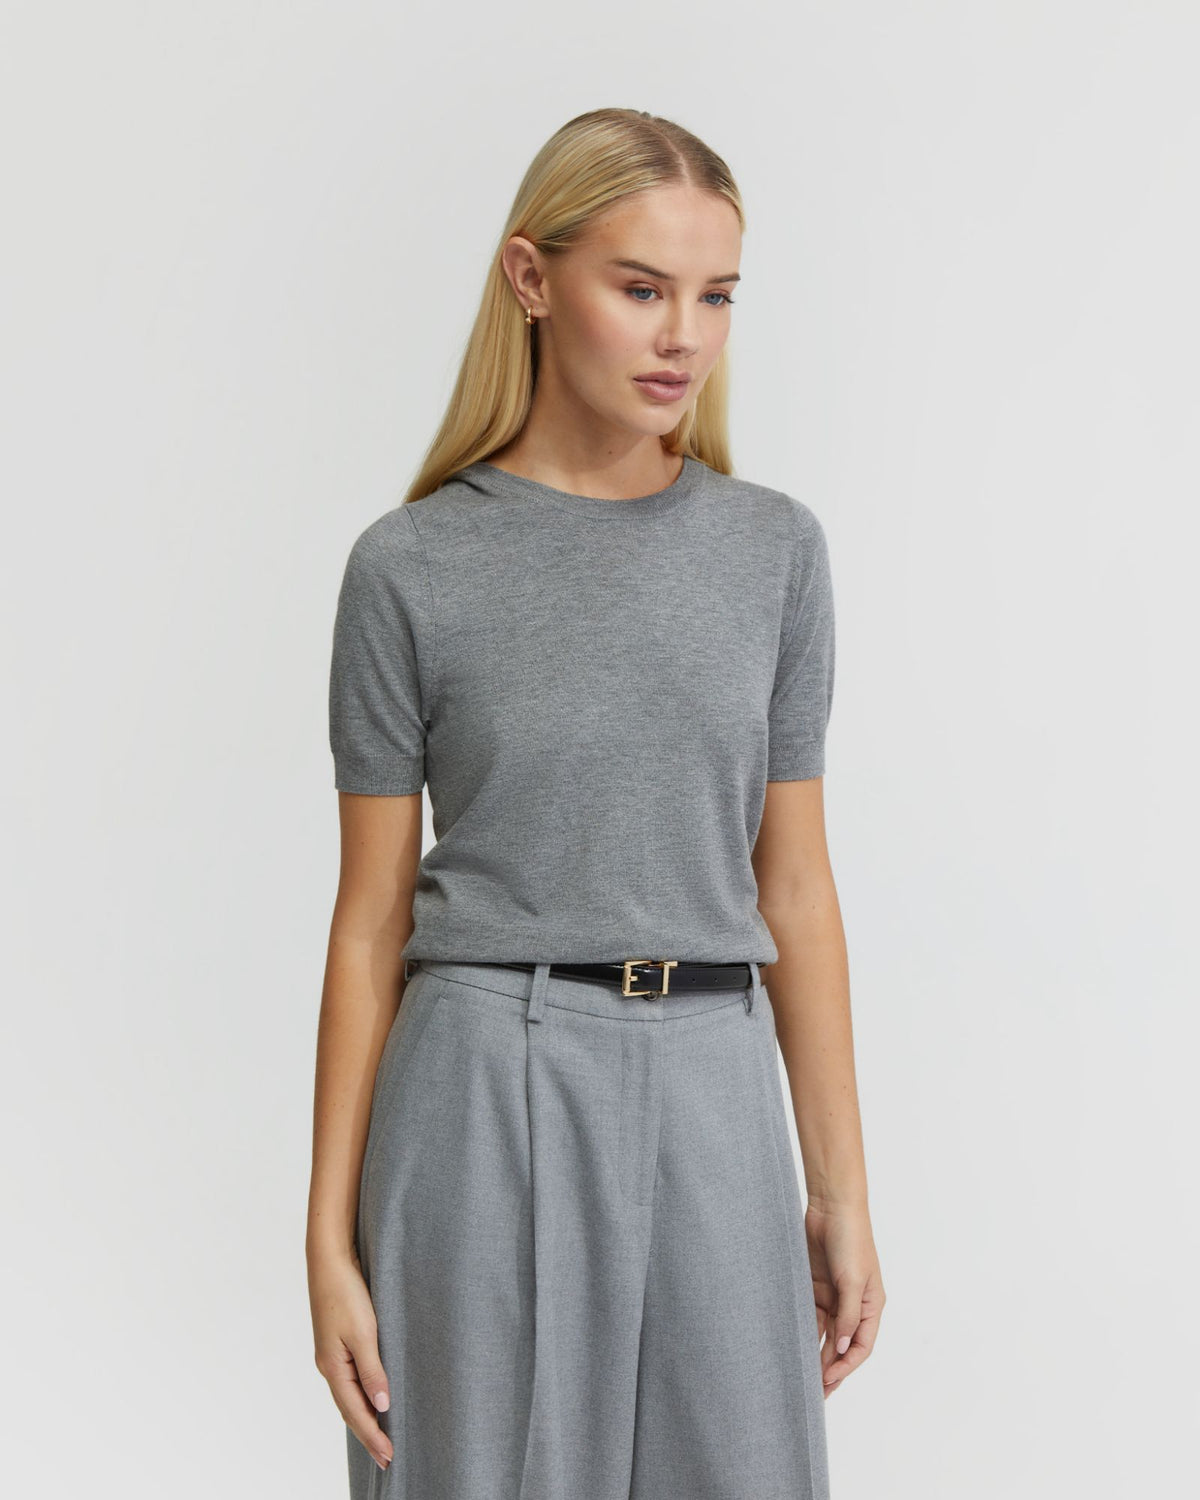 GRACE SHORT SLEEVE CASHMERE BLEND KNIT - AVAILABLE ~ 1-2 weeks WOMENS KNITWEAR